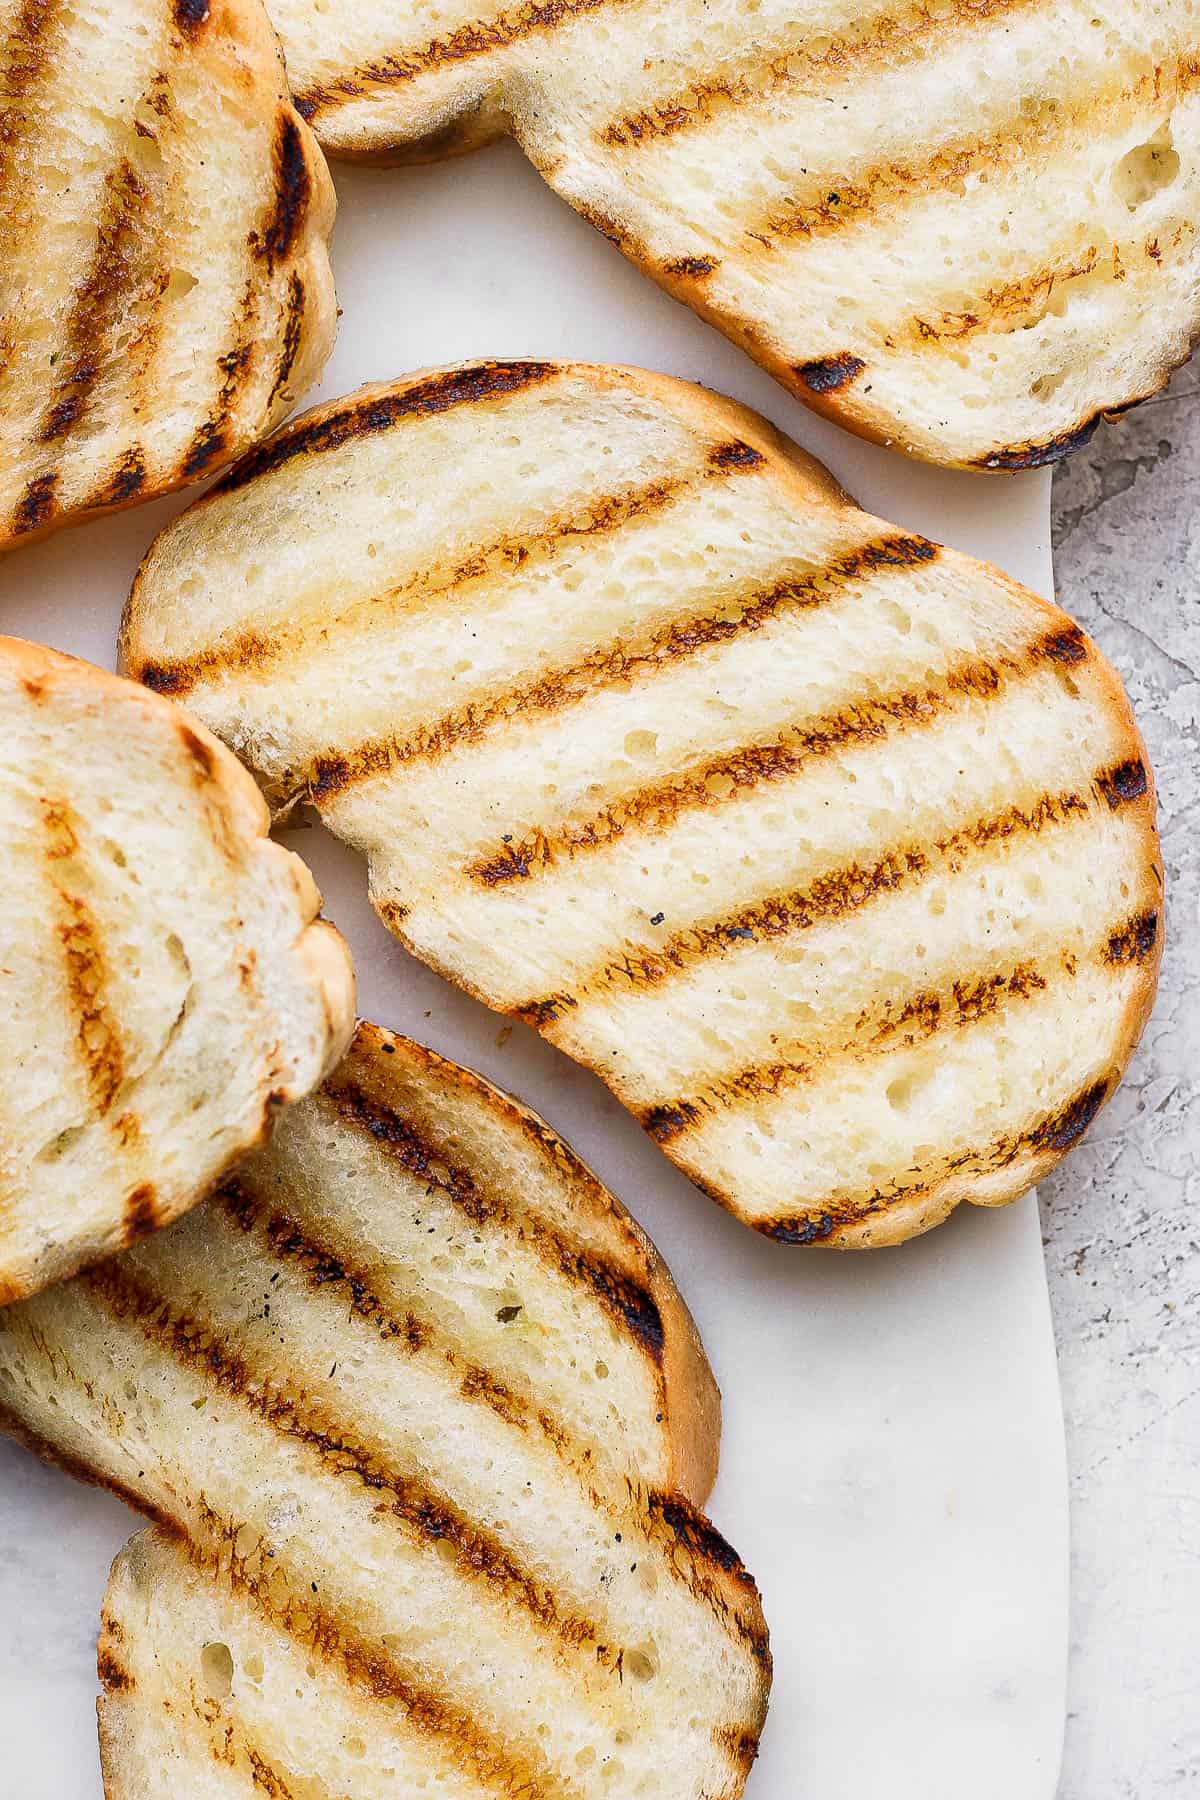 Grilled Bread - The Wooden Skillet